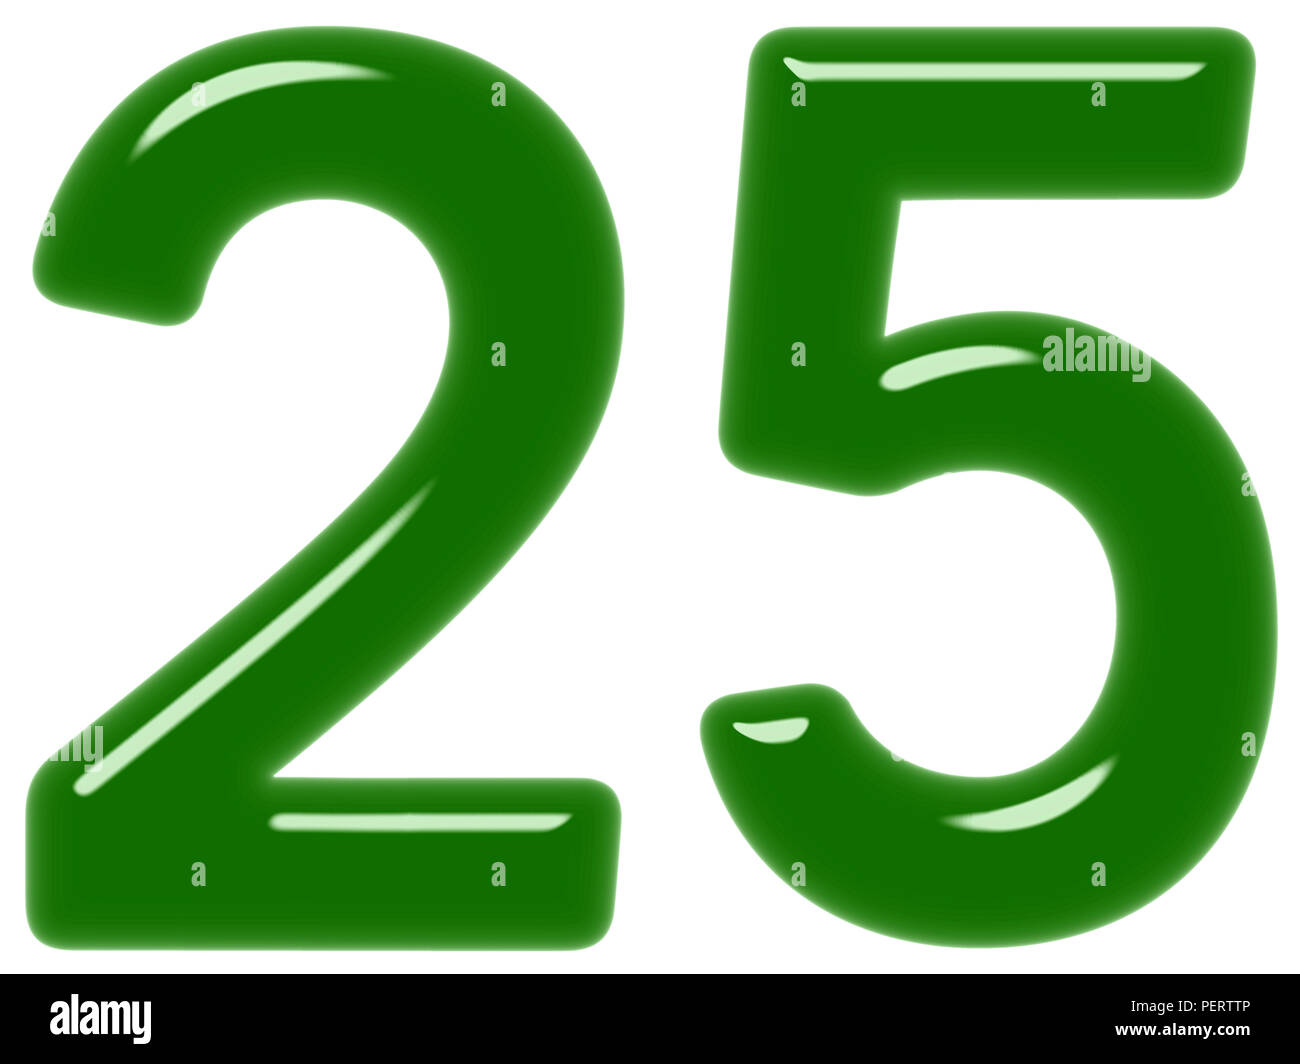 Numeral 38, Thirty Eight, Isolated on White Background, 3d Stock  Illustration - Illustration of extrusion, color: 87372411